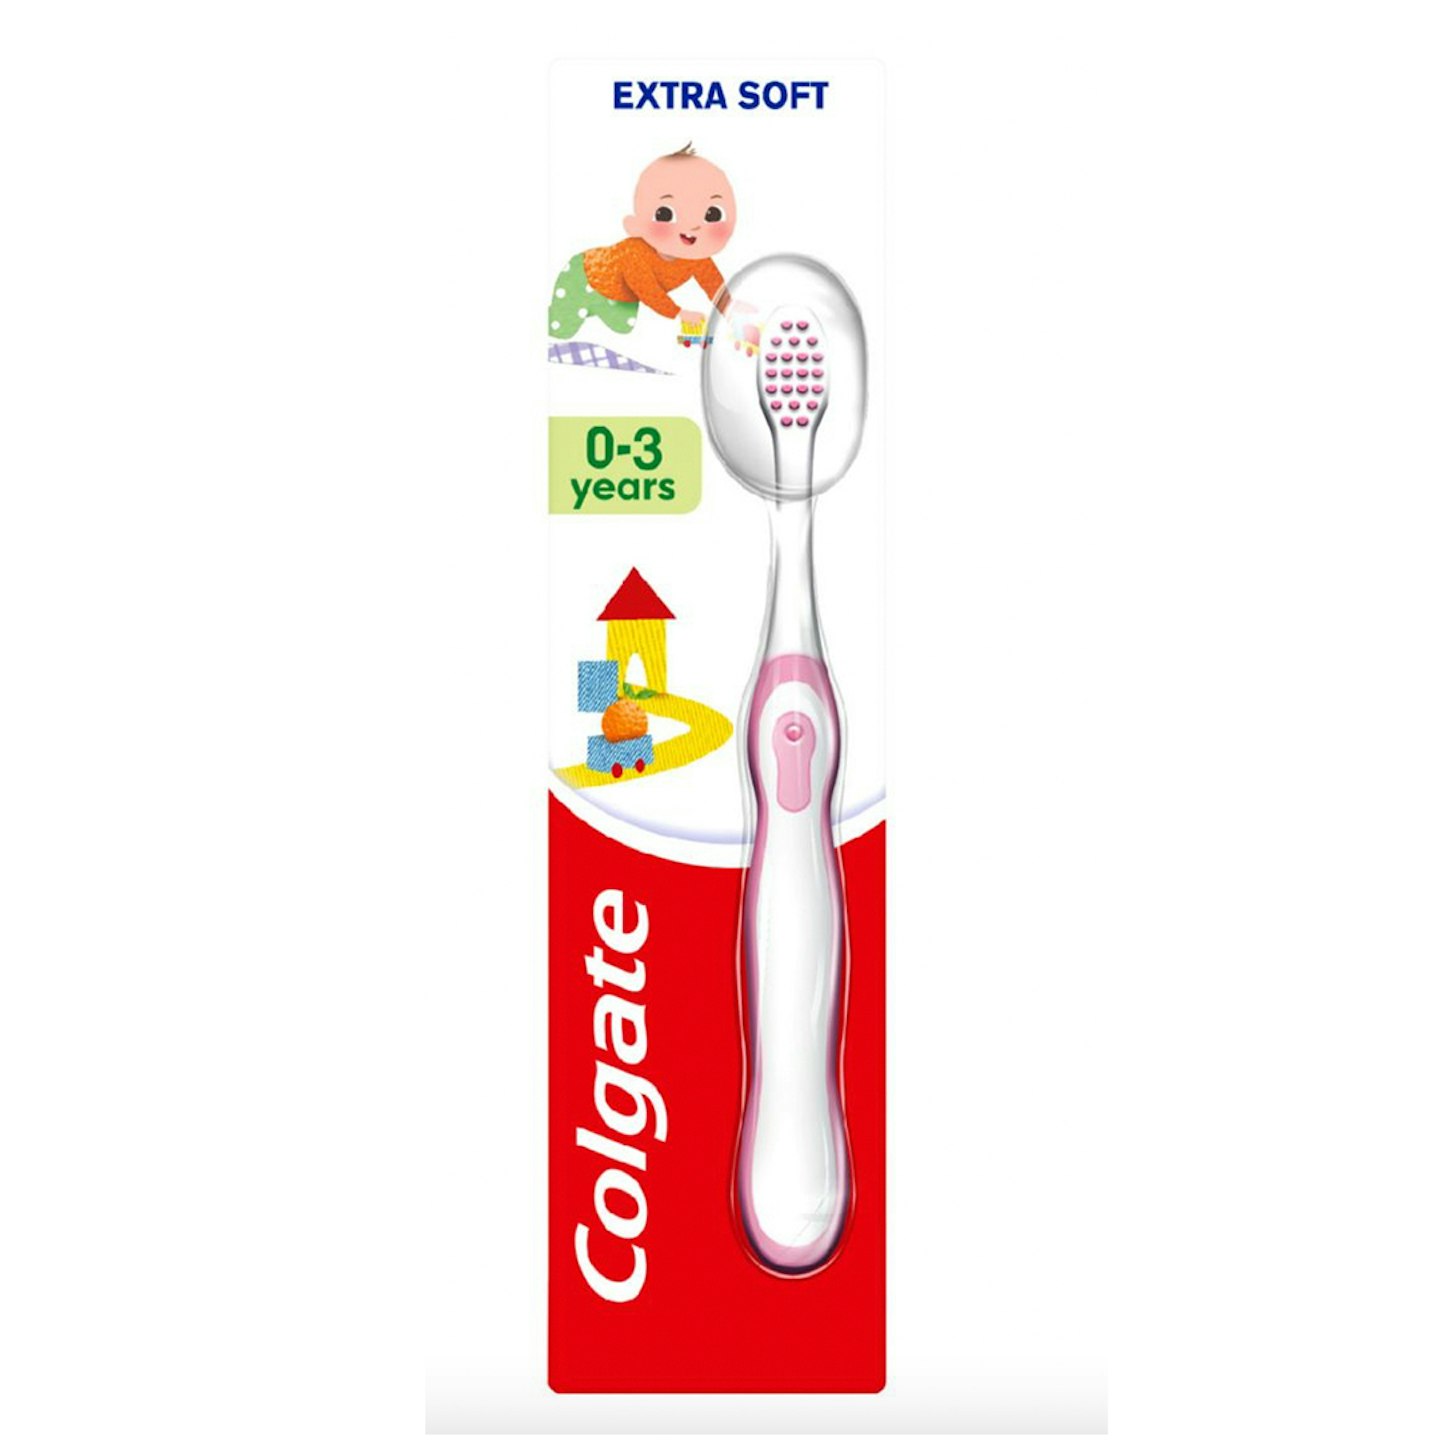 Best toothbrushes for kids Colgate Kids 0-3 Years Extra Soft Toothbrush